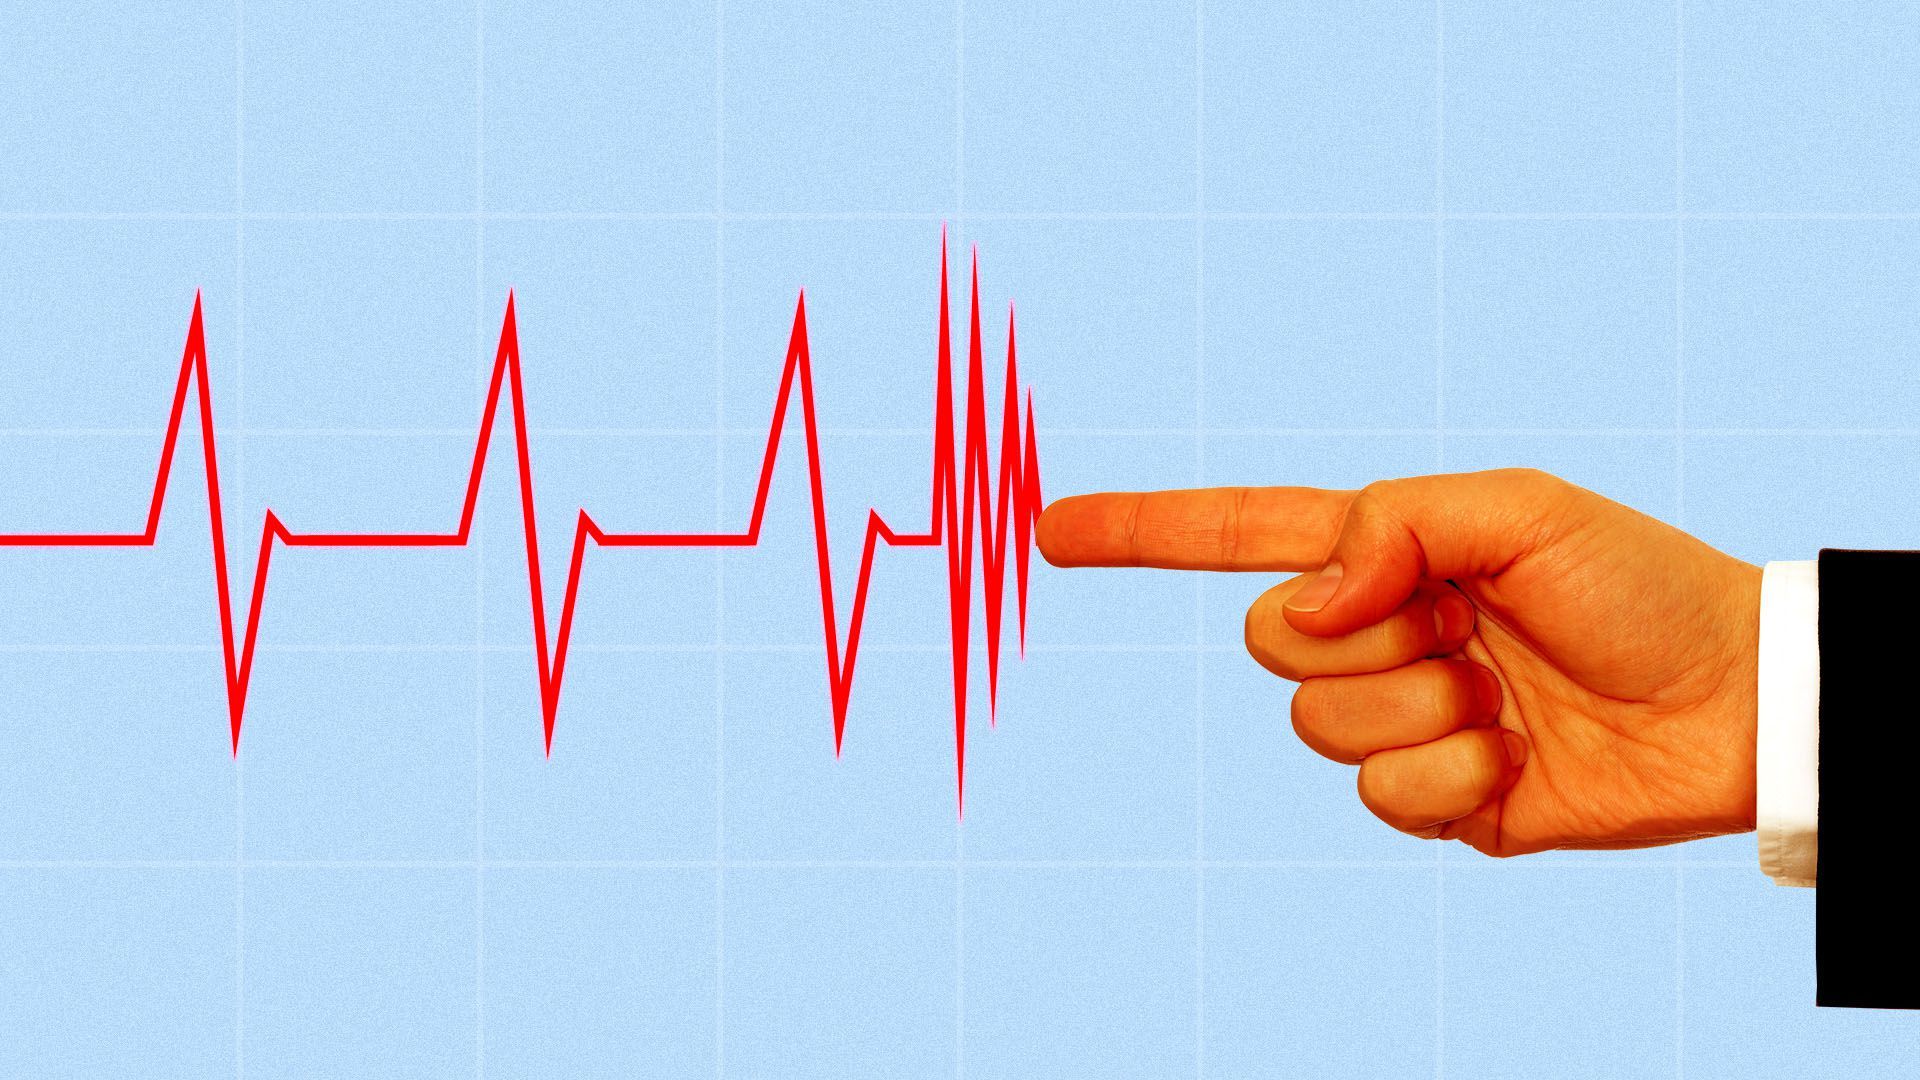 Illustration of President Trump's hand stopping a heart monitor signal